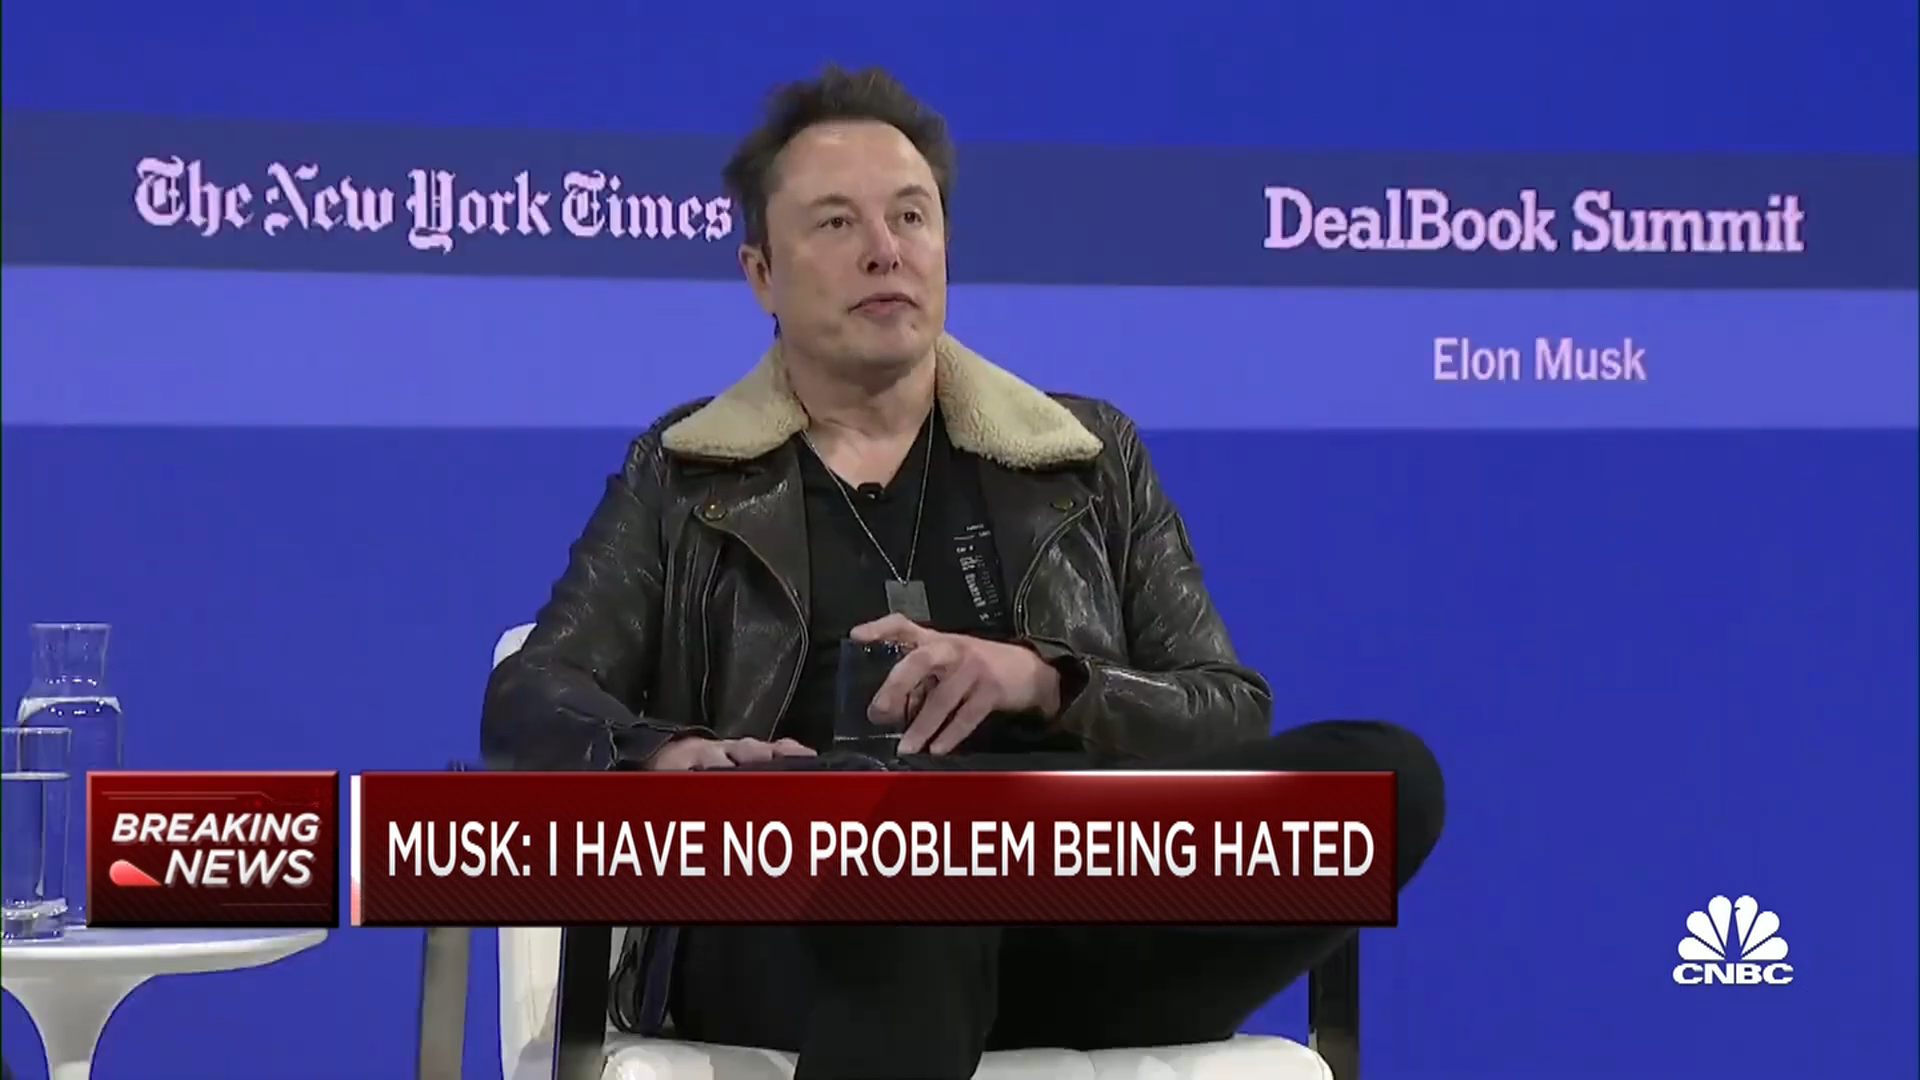 Musk To Disney: Go F*** Yourself